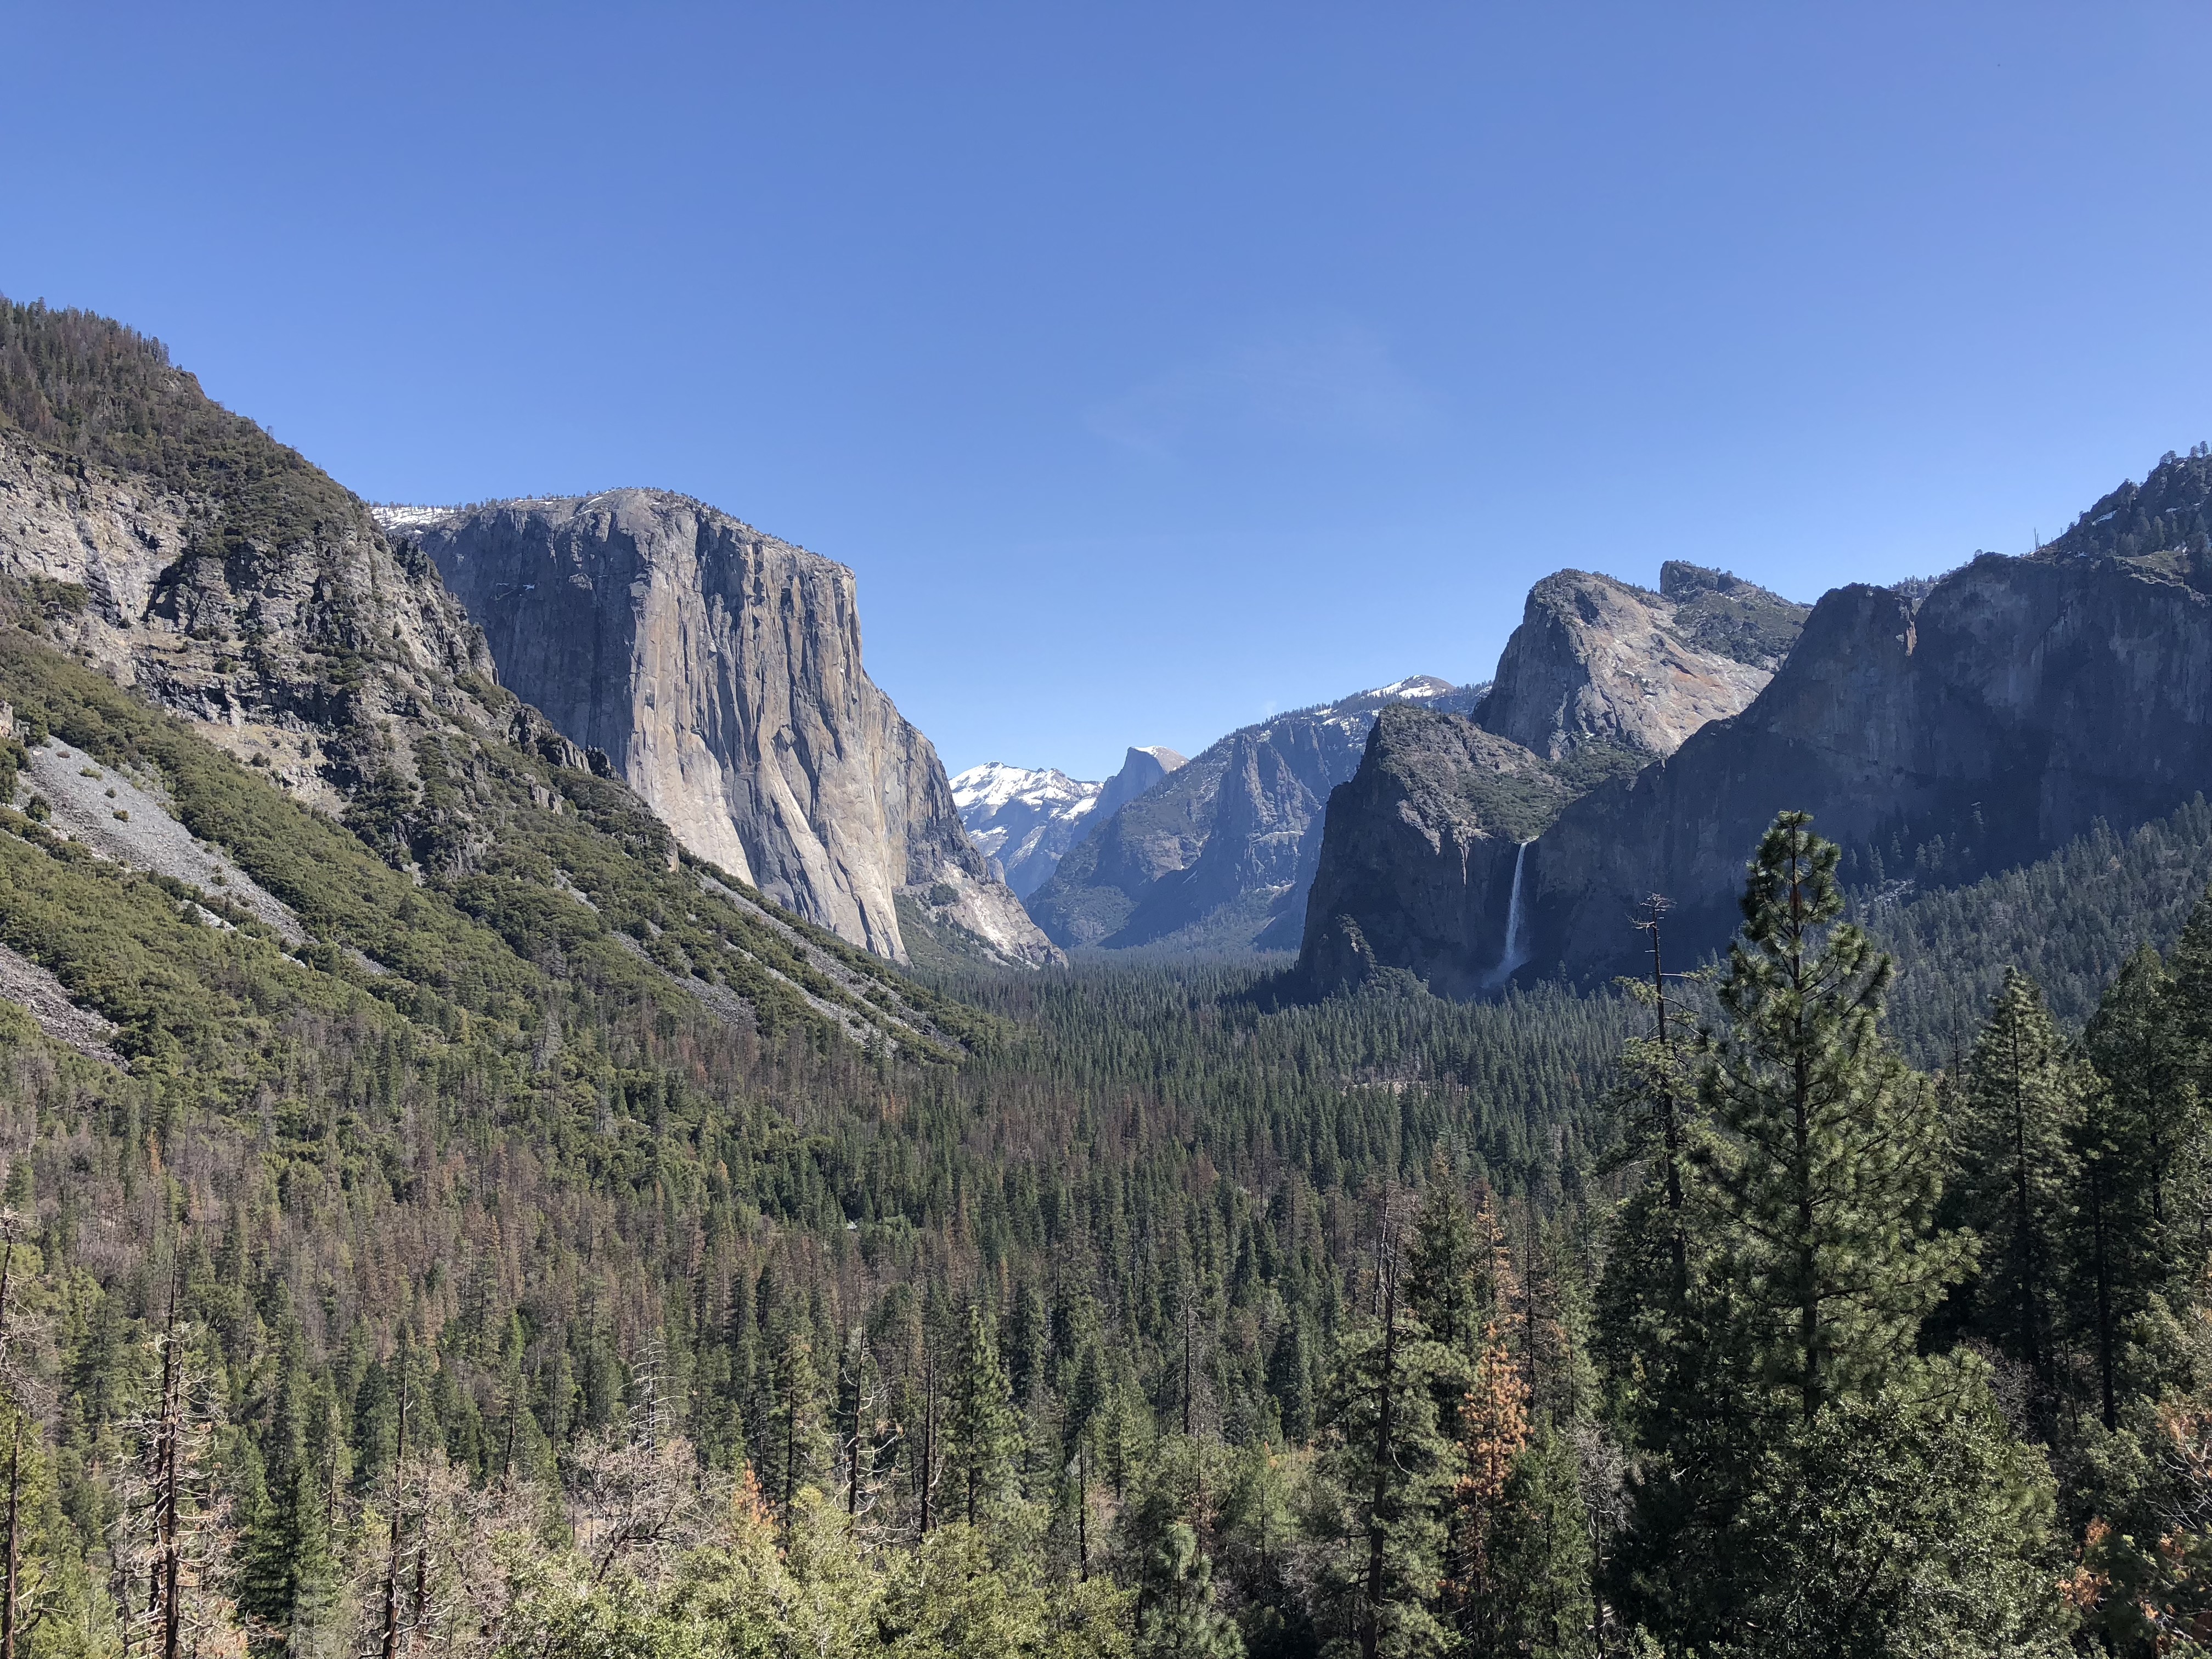 the famous Tunnel View in Yosemite